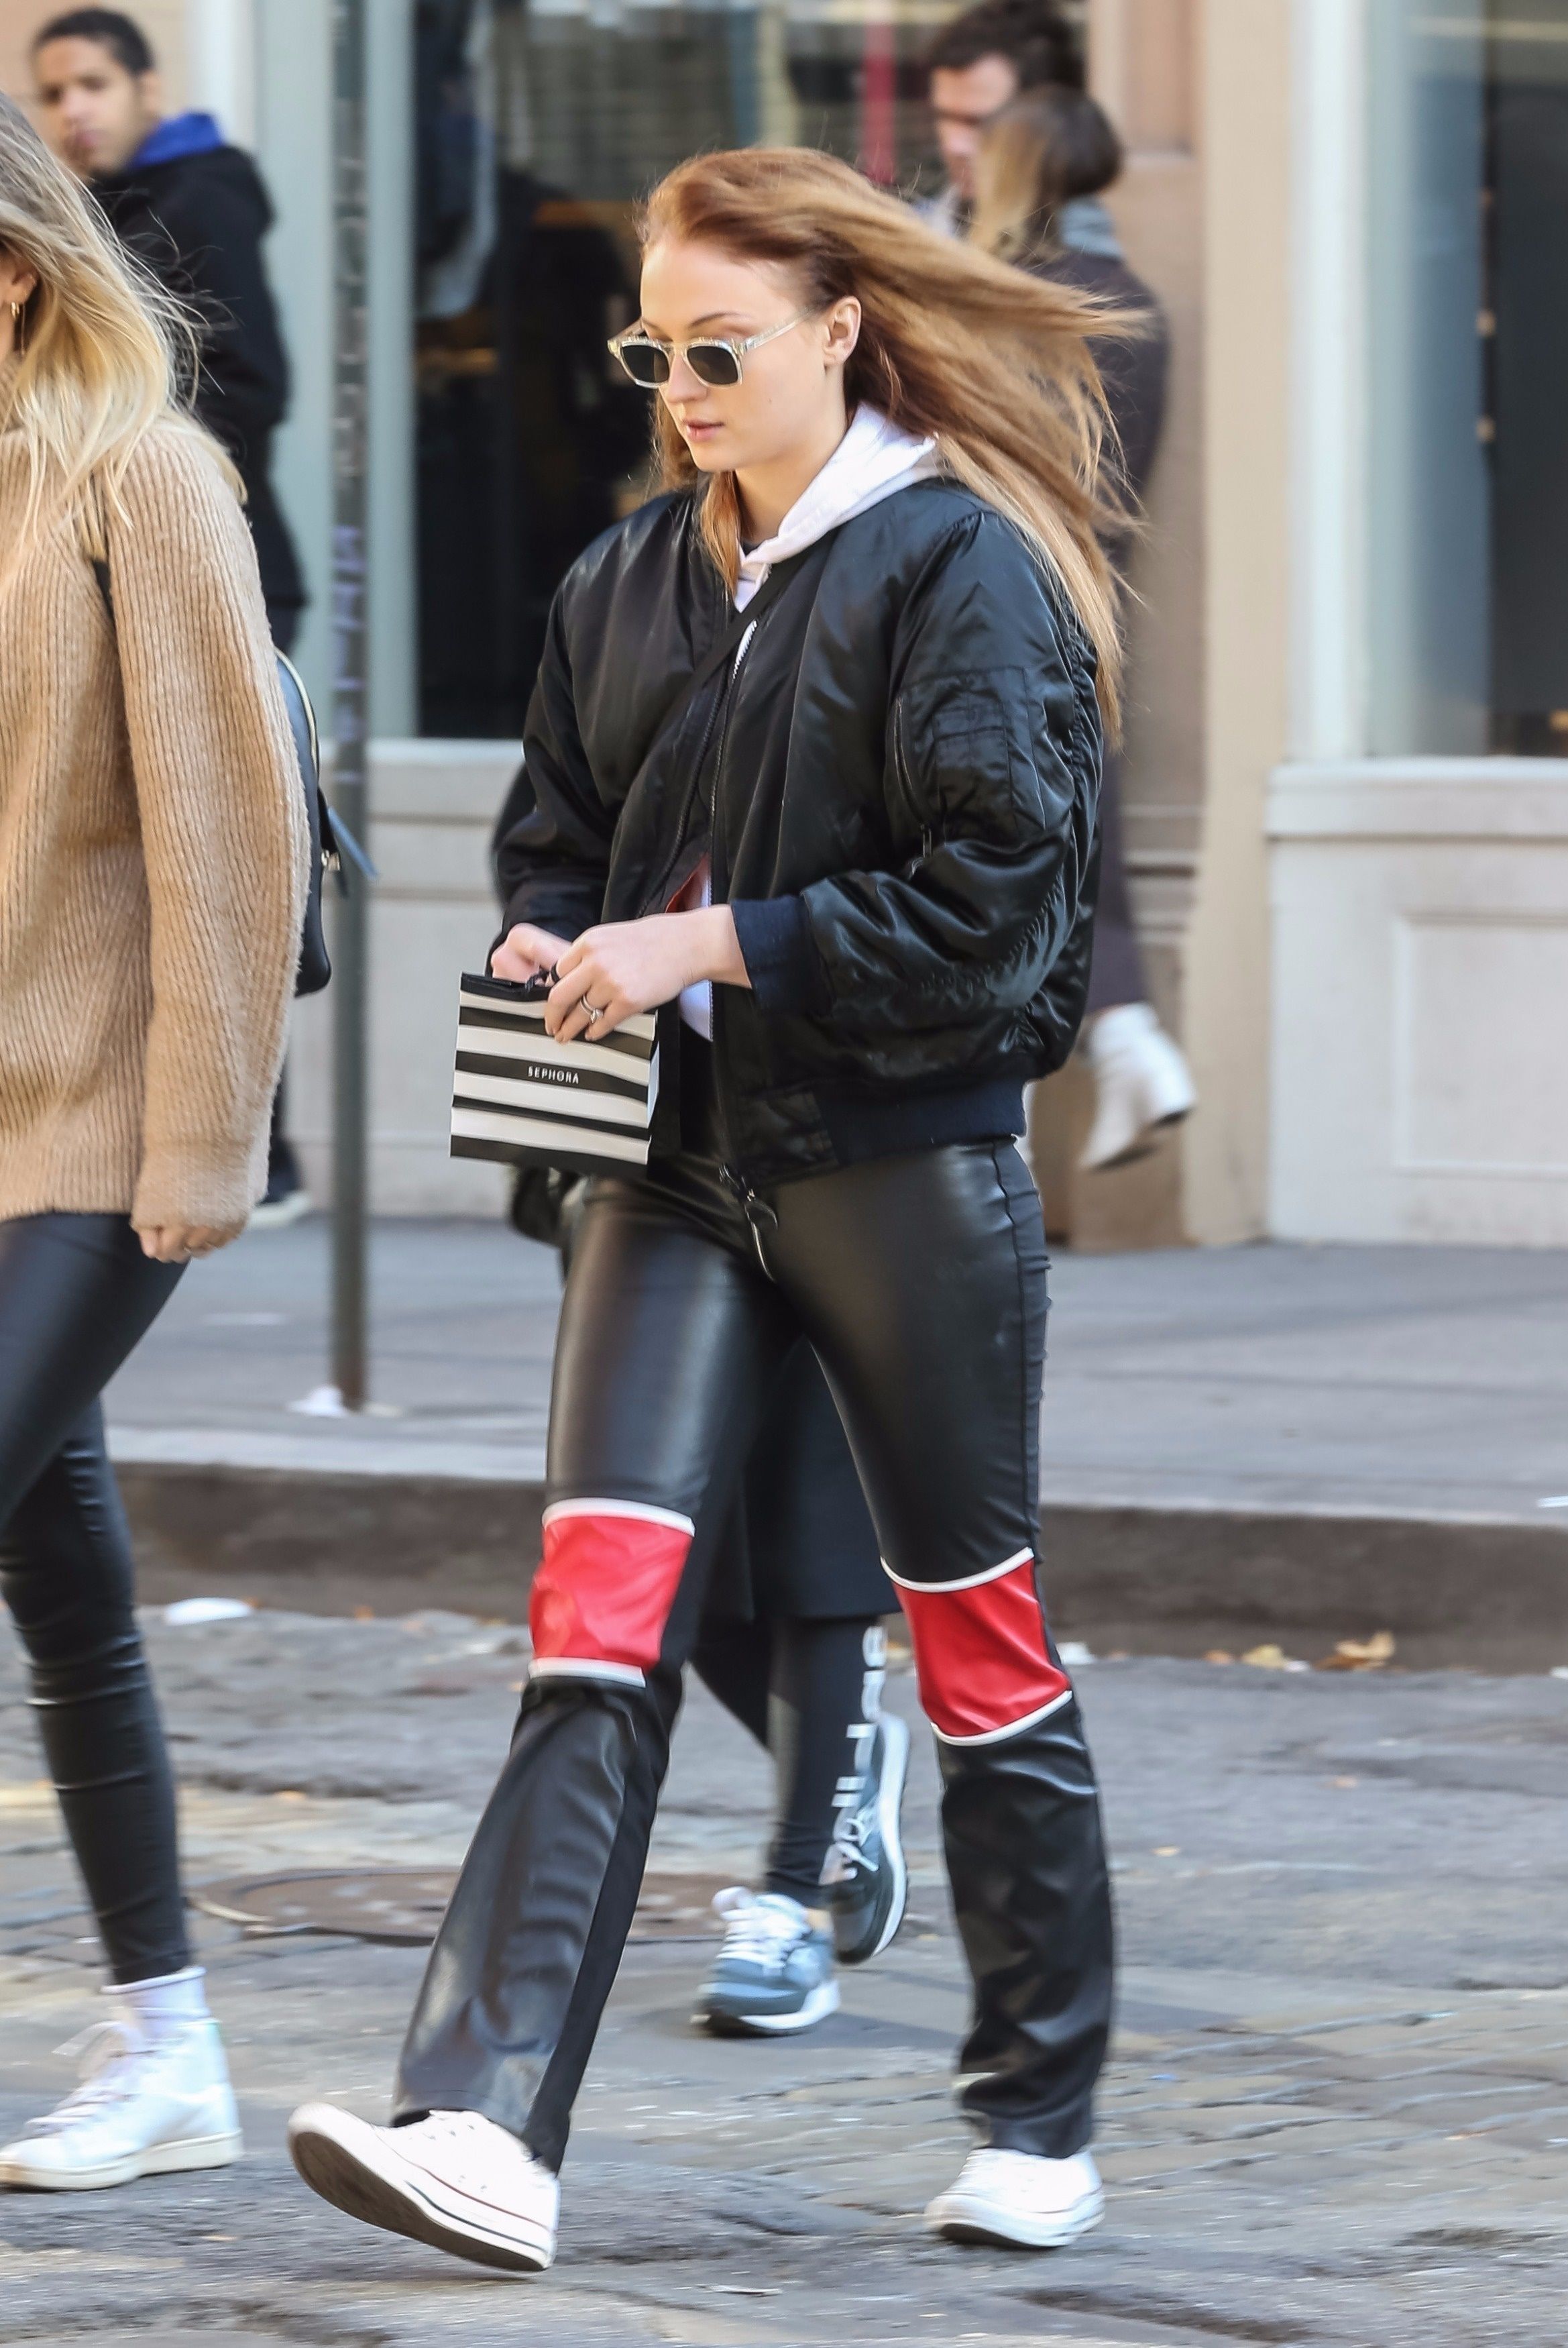 Sophie Turner out shopping in Soho